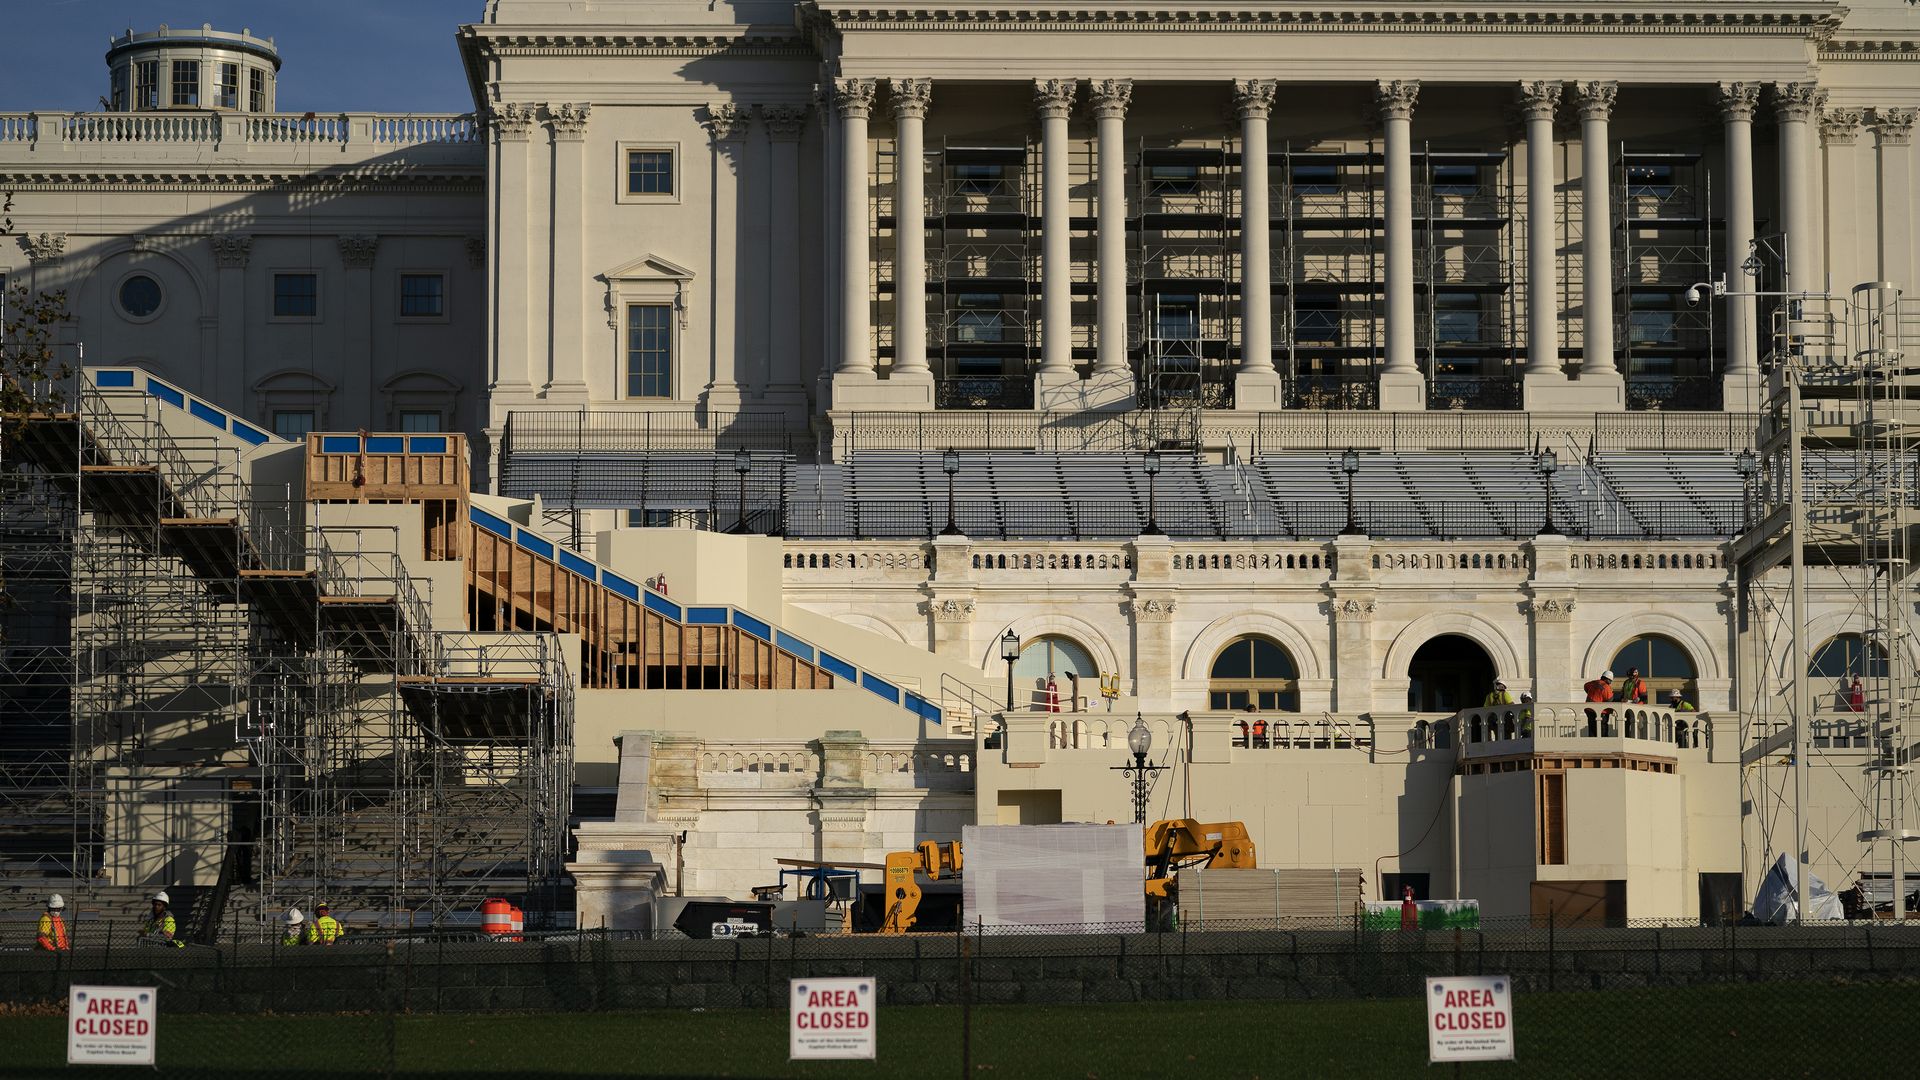 The inaugural platform takes shape this week on the West Front of the U.S. Capitol.